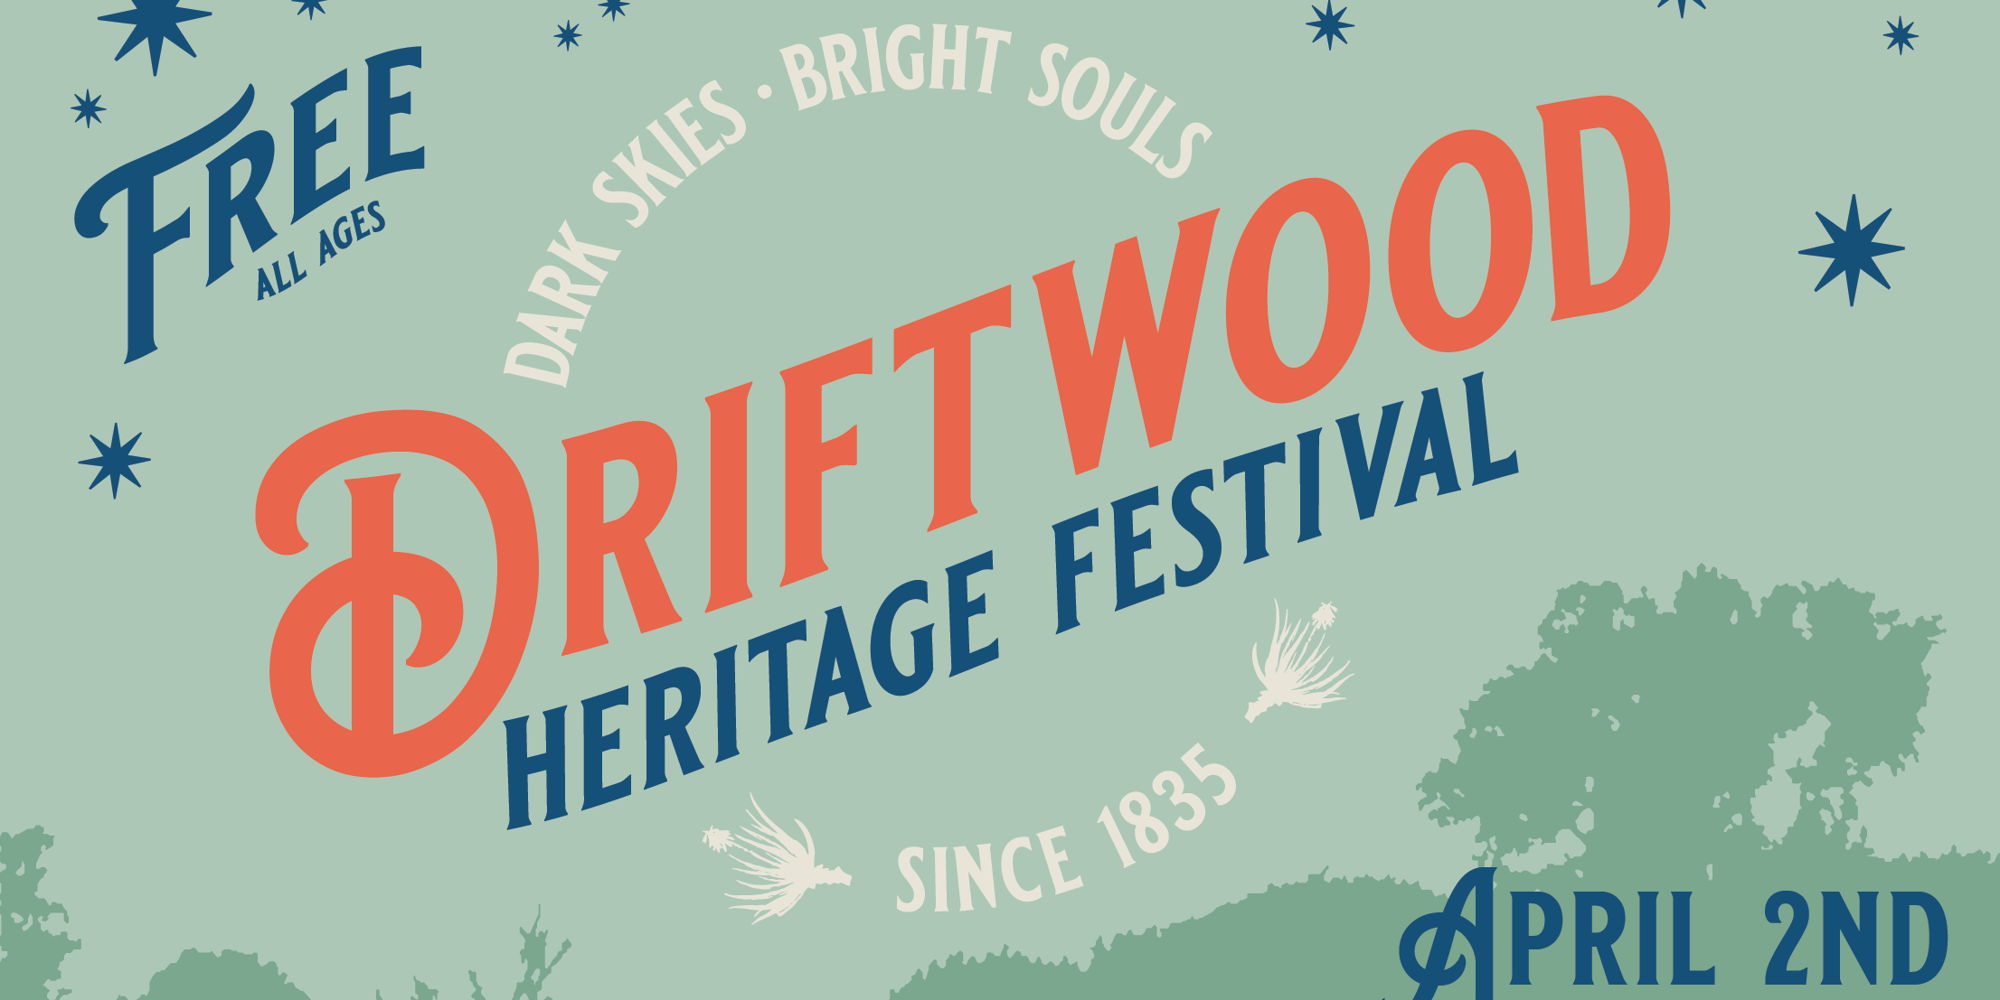 Driftwood Heritage Festival at Vista Brewing promotional image